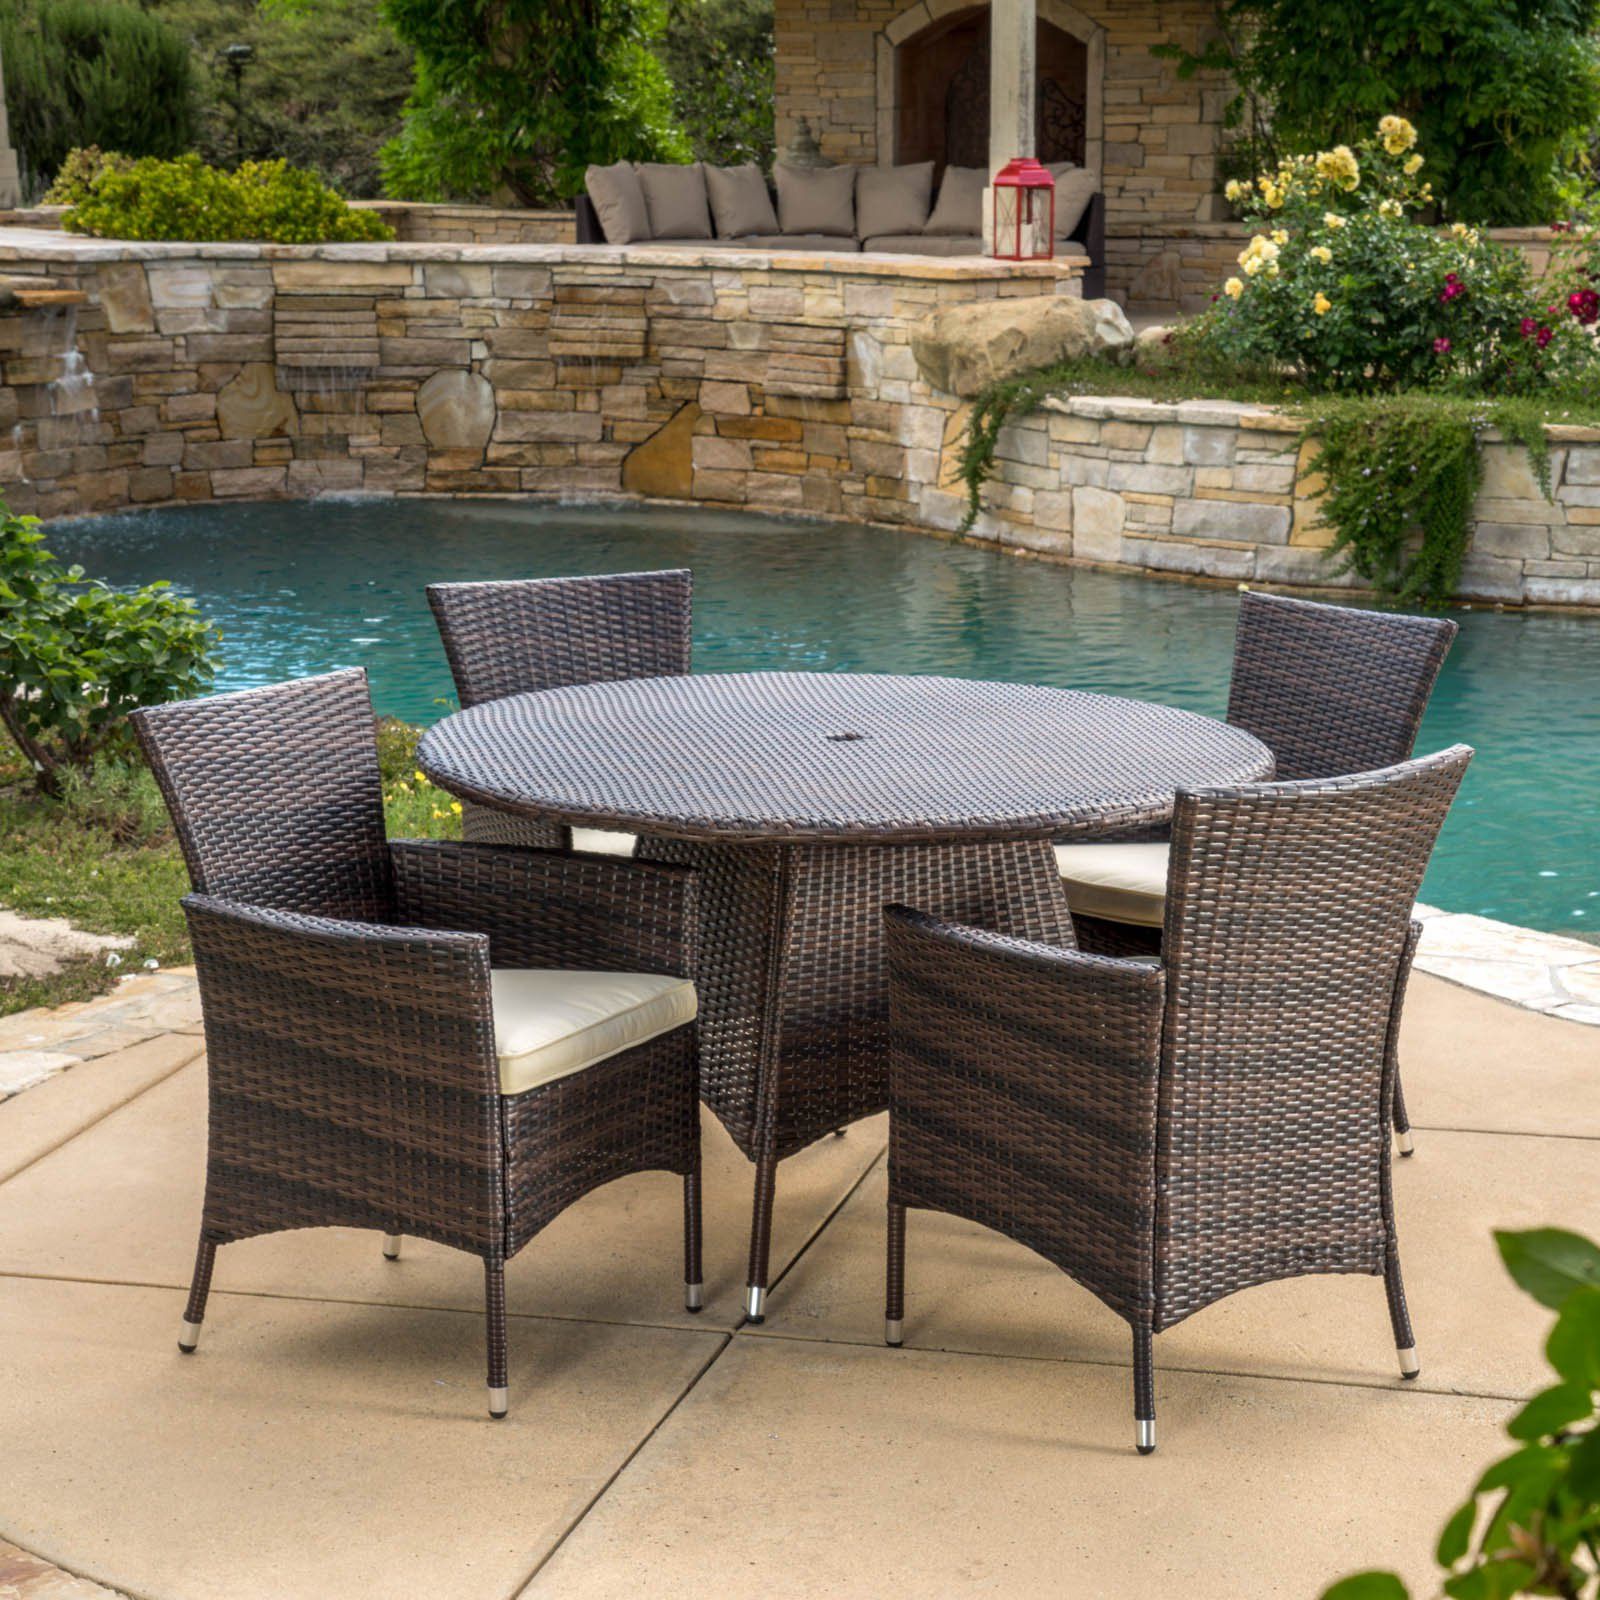 Rattan Wicker Outdoor Seating Sets Inside Recent Madison Wicker 5 Piece Round Patio Dining Set With Cushions – Walmart (View 2 of 15)